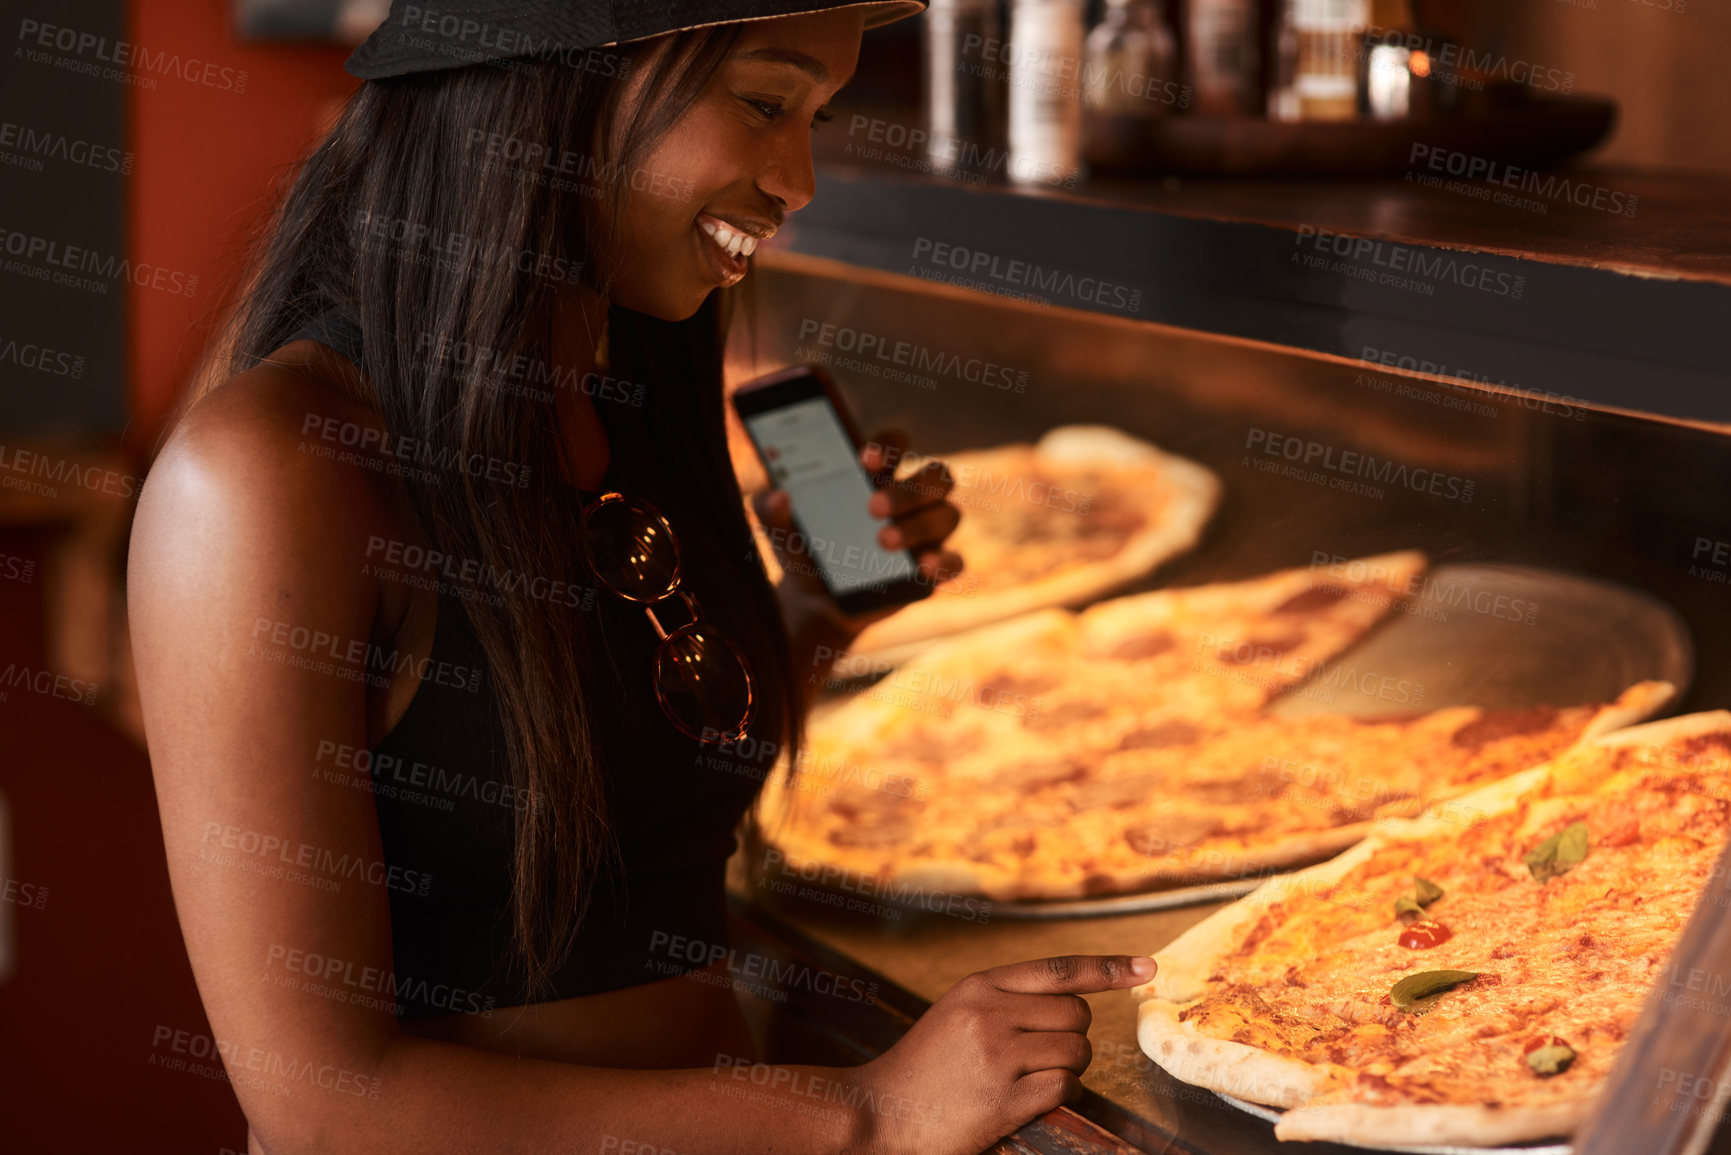 Buy stock photo Cropped shot of a young woman ordering pizza at a cafe